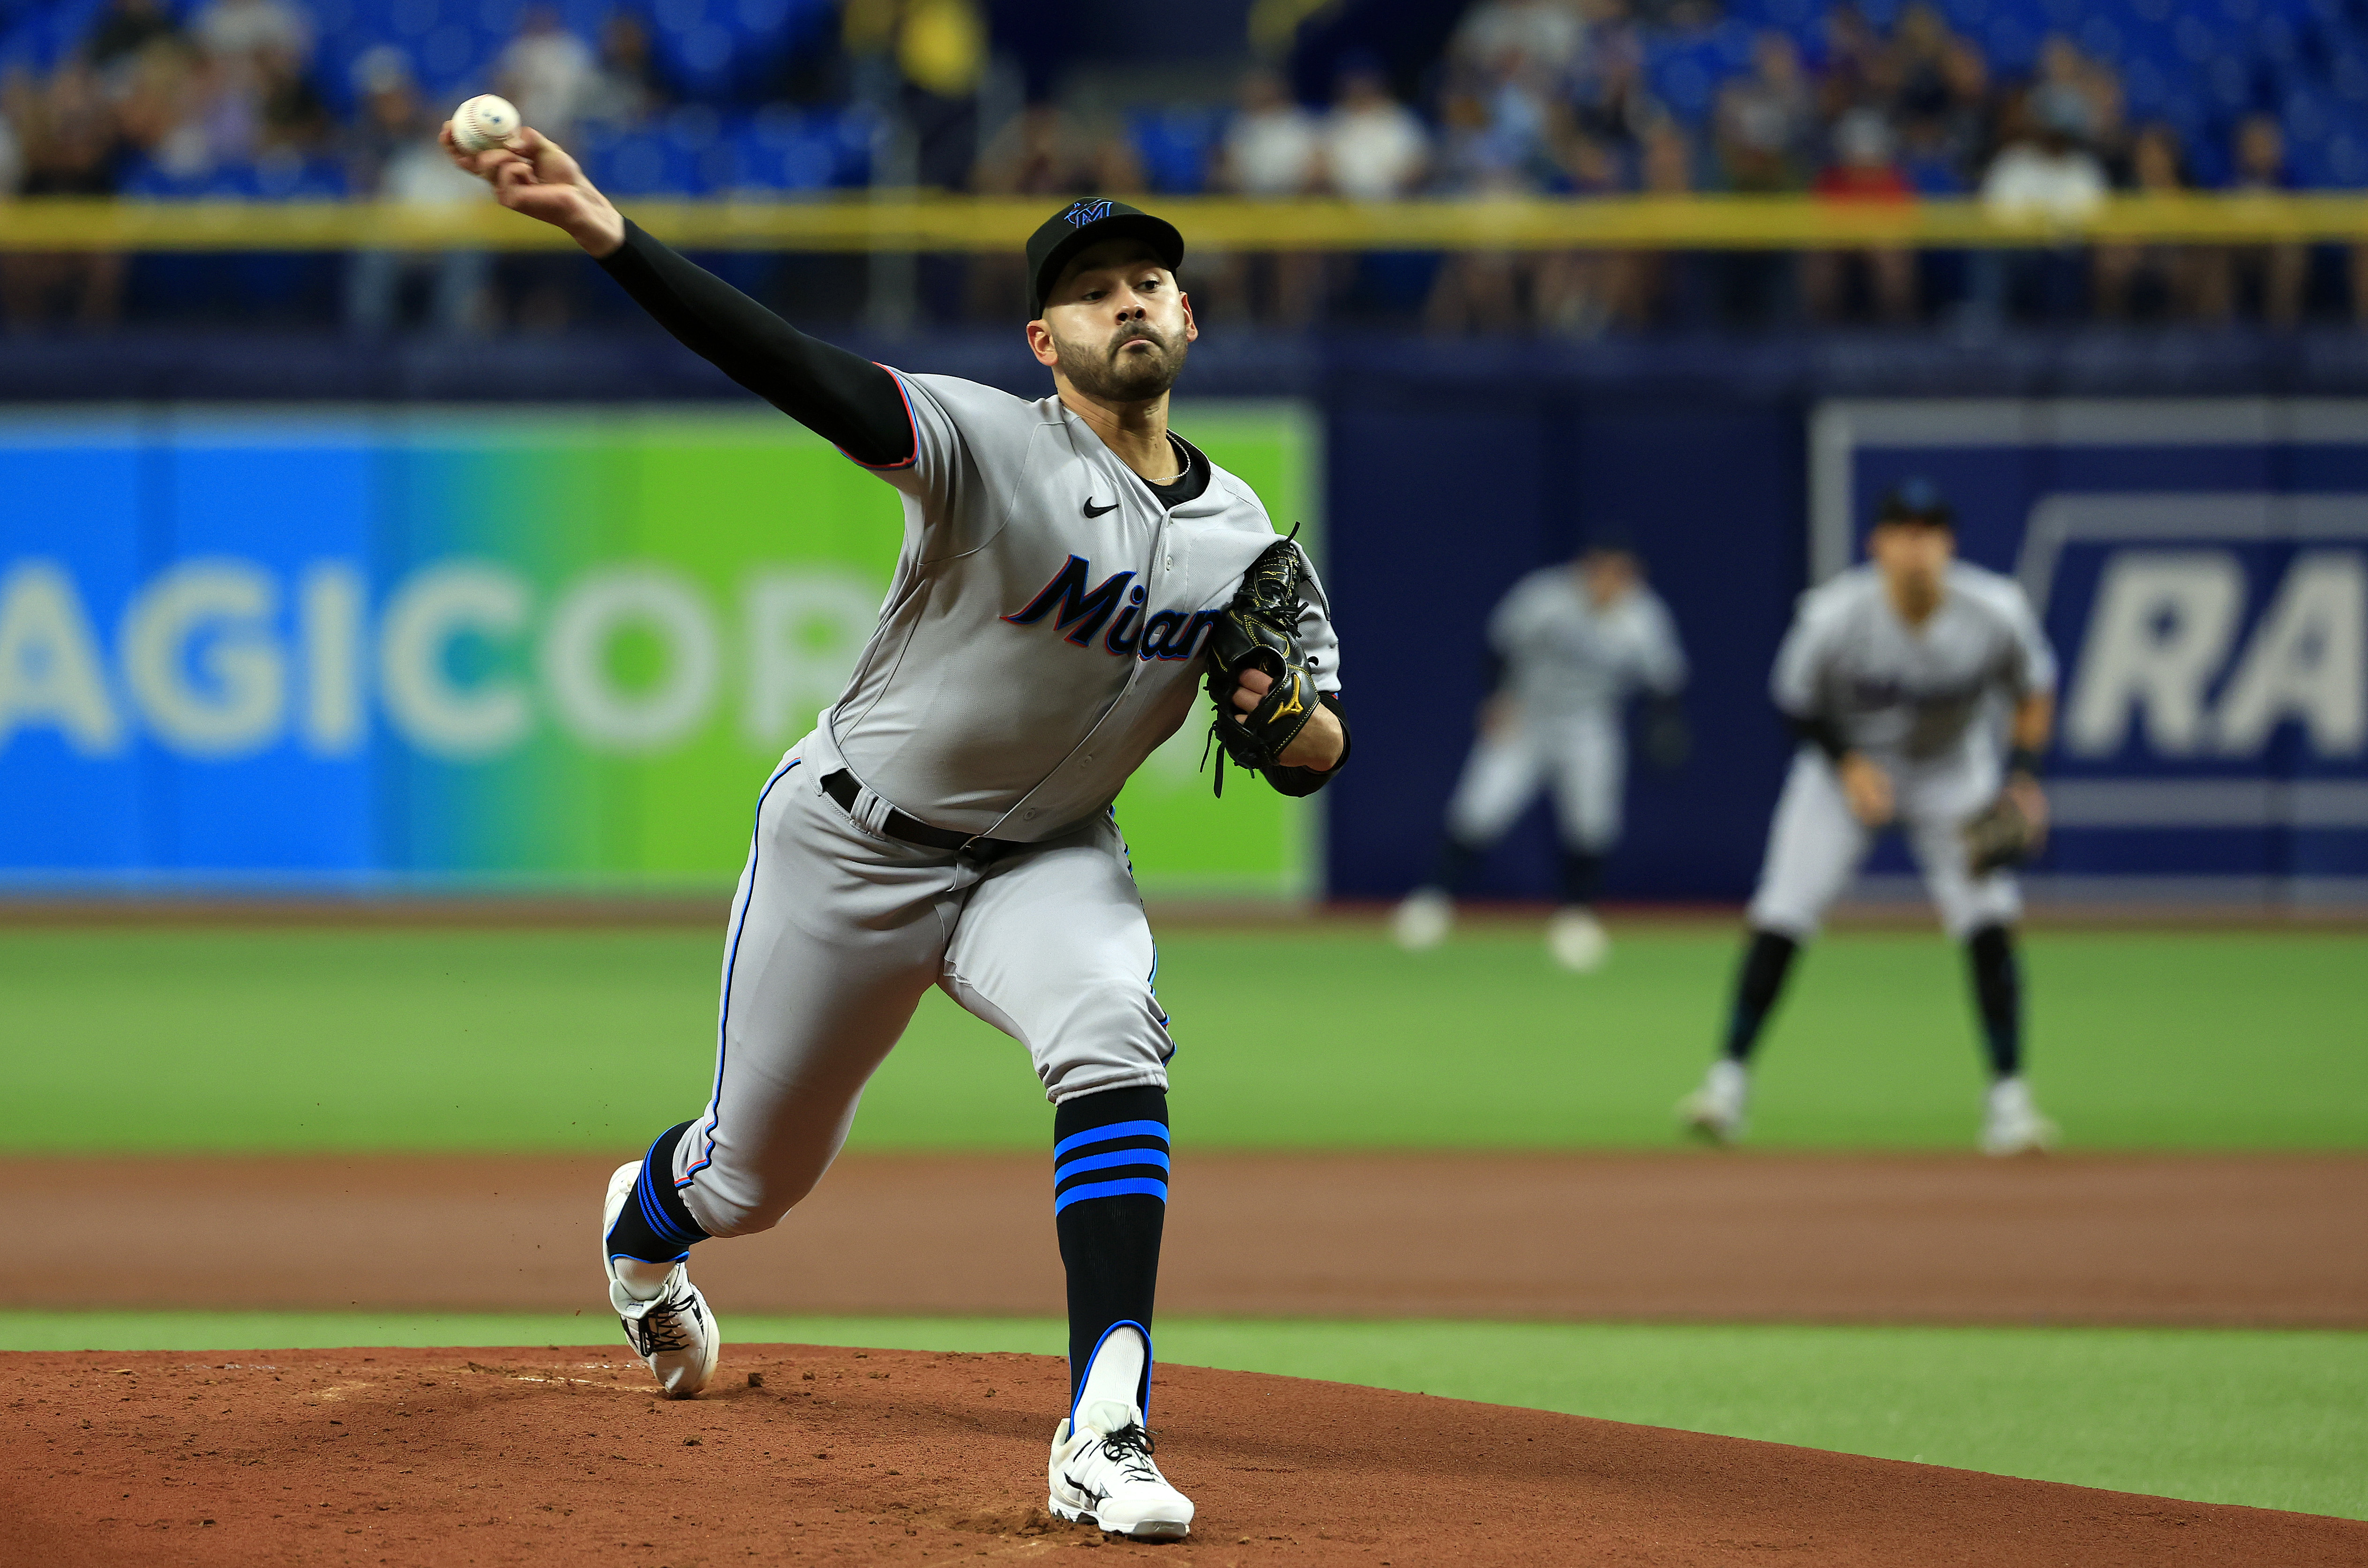 Pablo Lopez #49 of the Miami Marlins pitches during a game against the Tampa Bay Rays at Tropicana Field